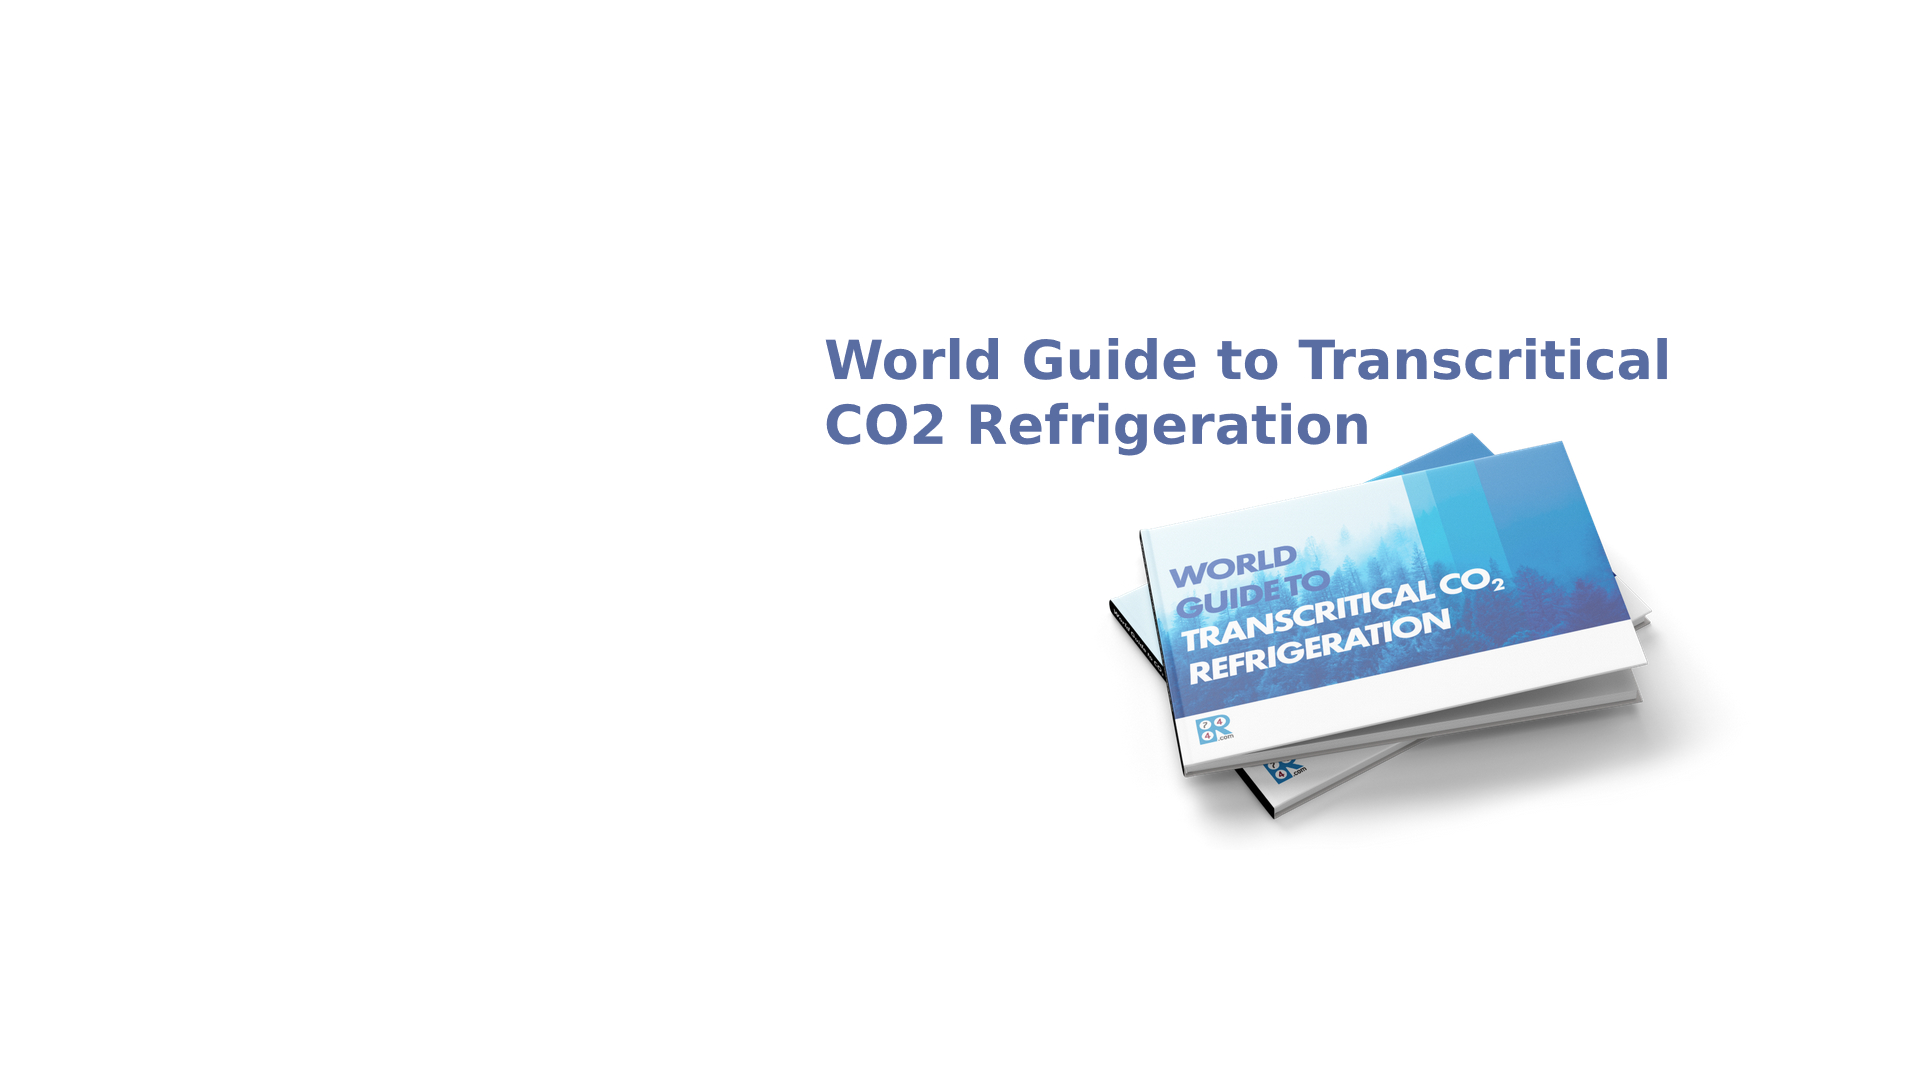 World Guide to Transcritical CO2 Refrigeration – już jest!